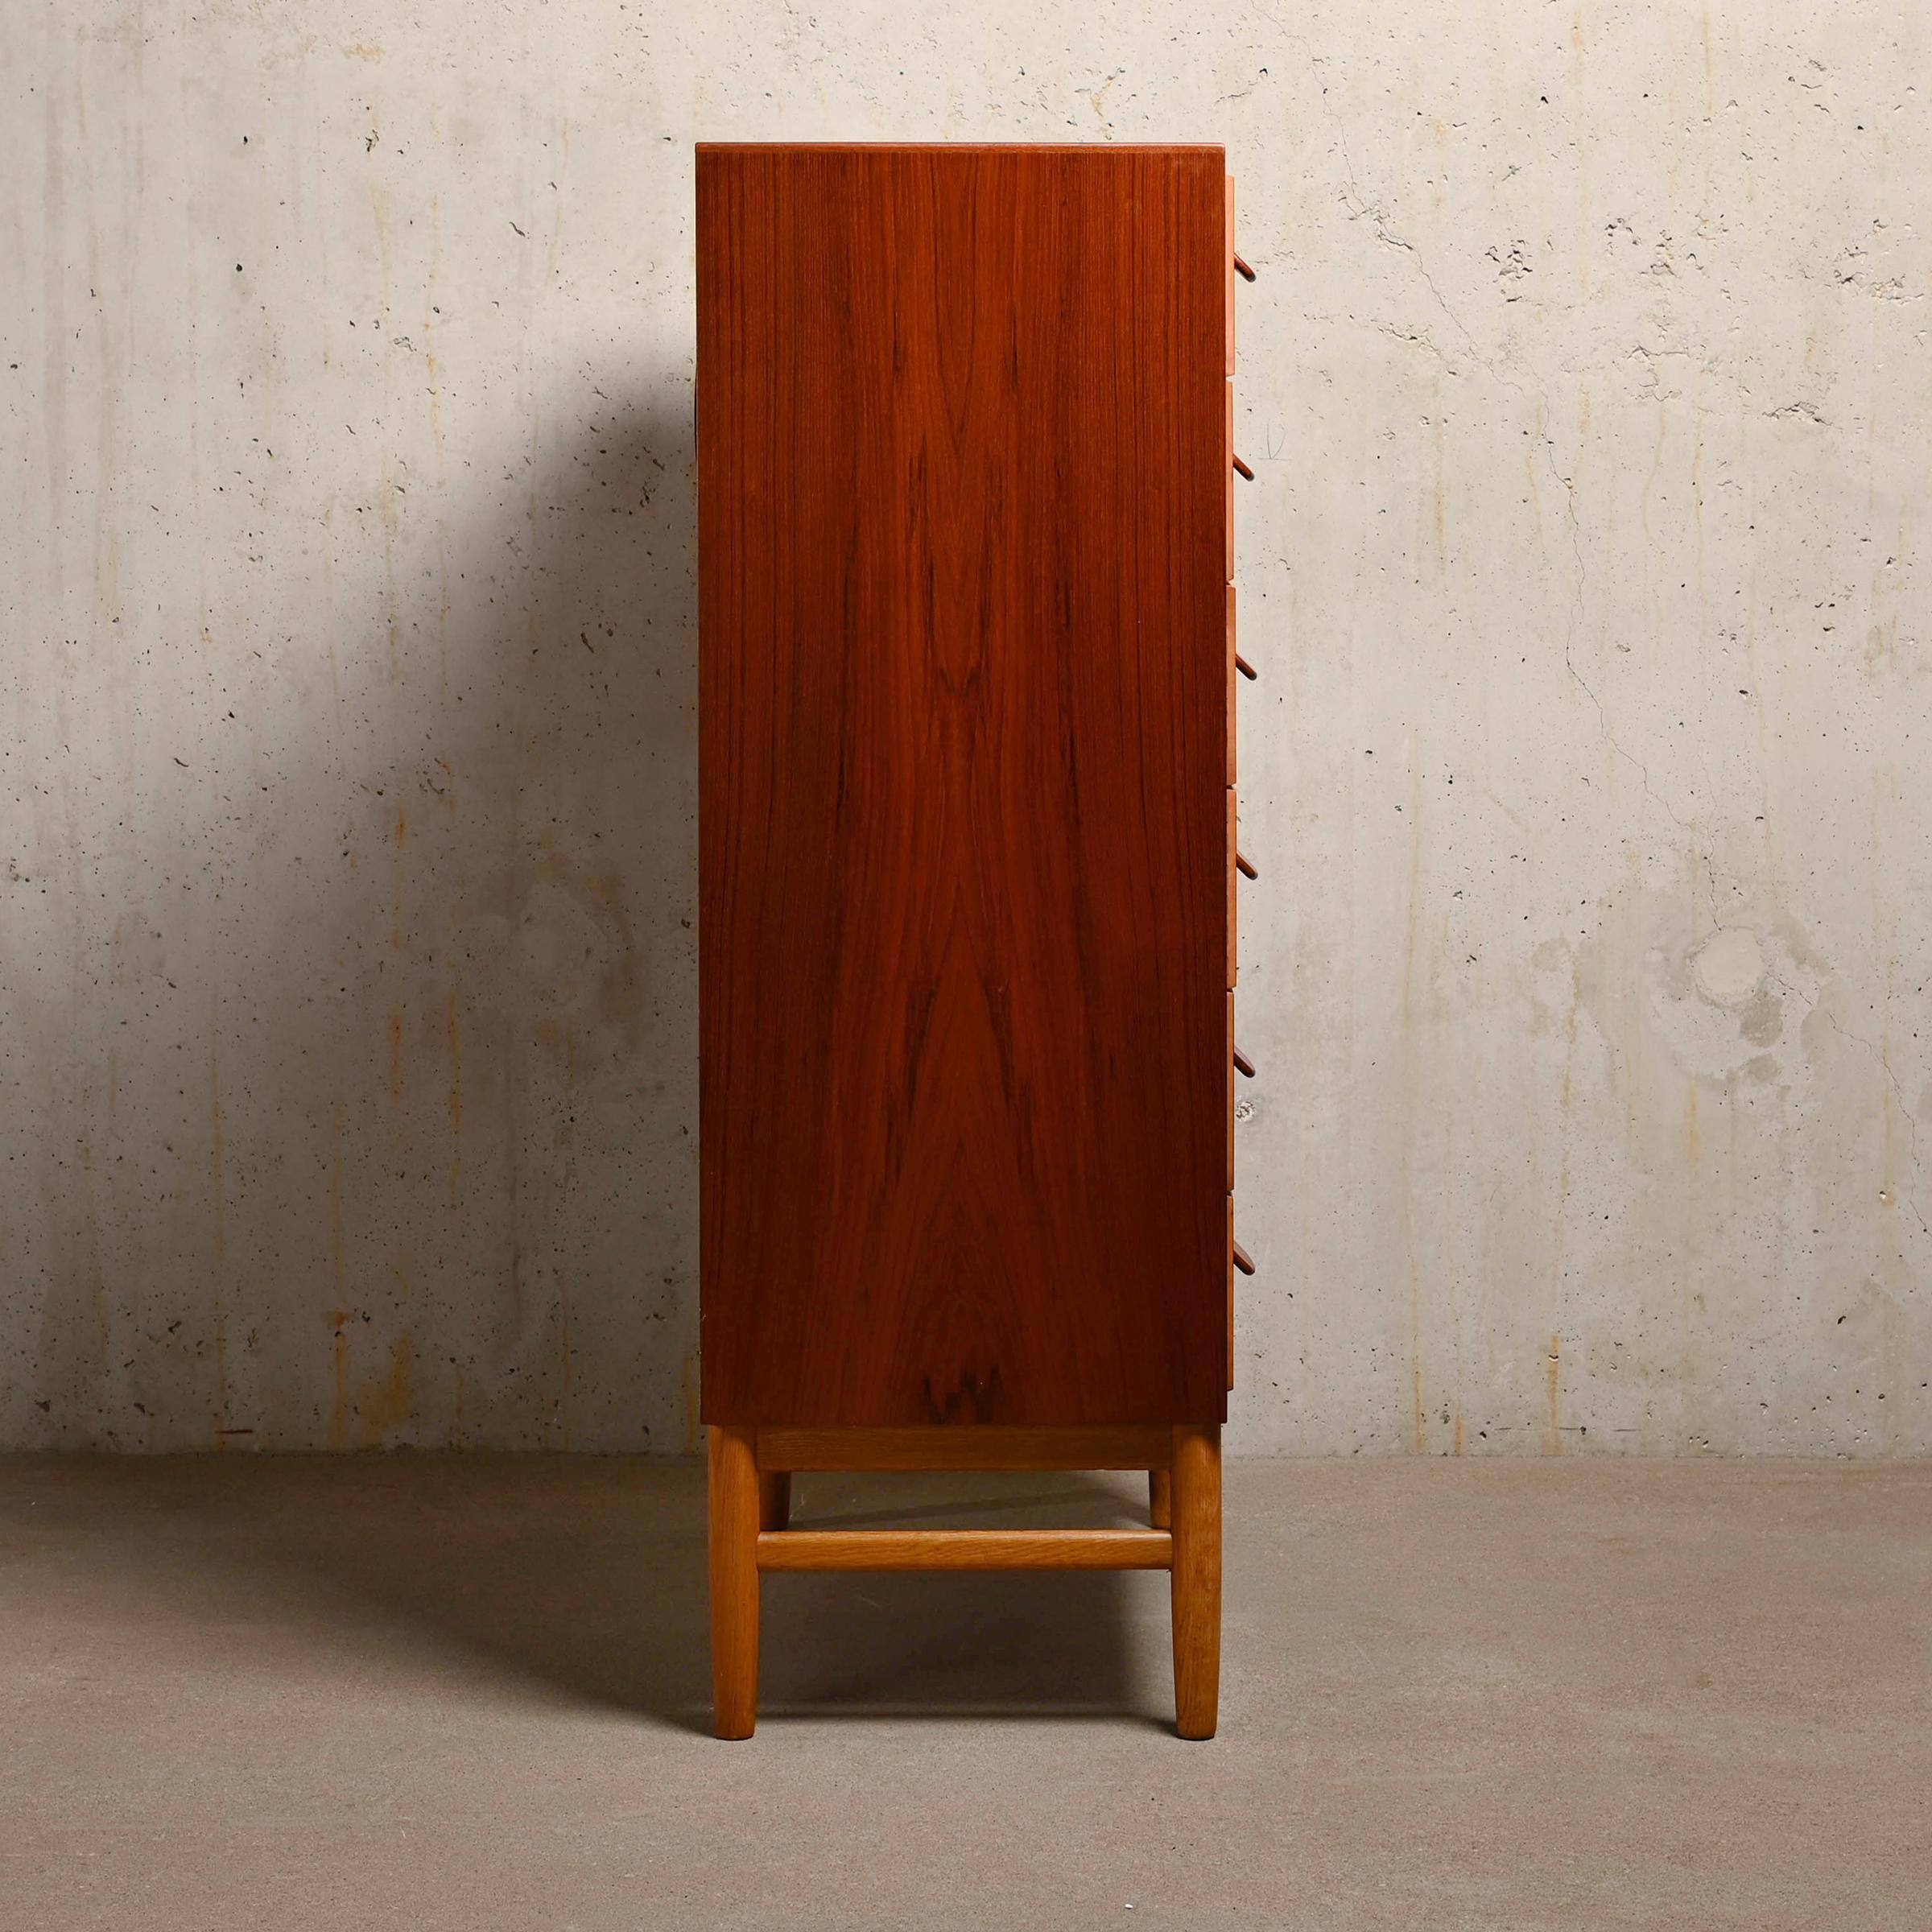 Mid-20th Century Poul Volther Chest of Drawers, Model F17 in teak and oak for FDB Møbler, Denmark